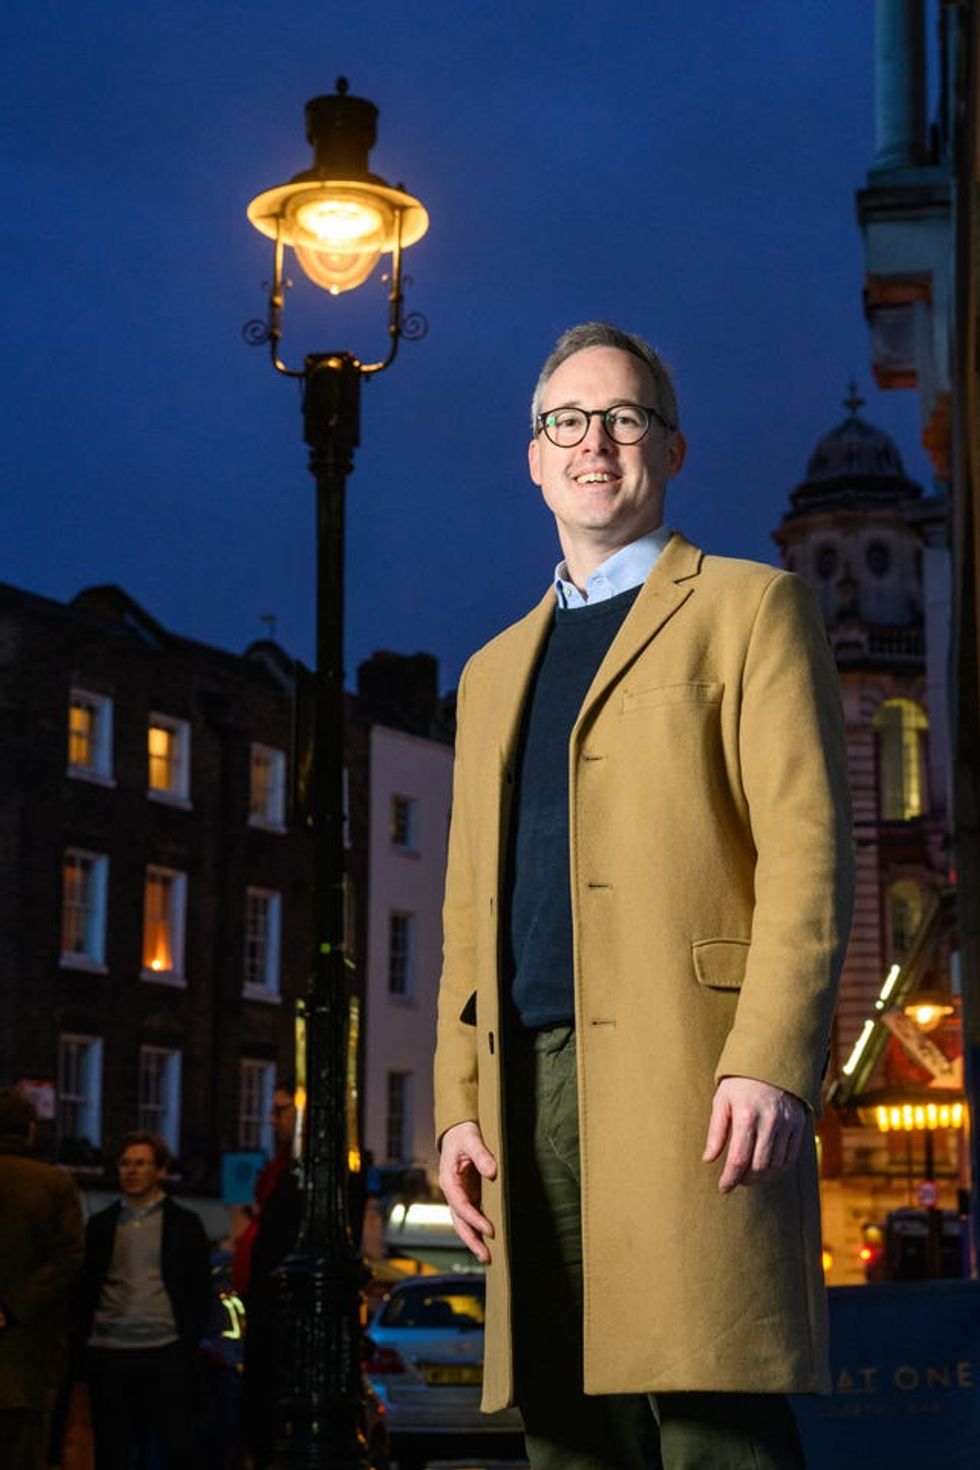 Arts and Heritage minister Lord Parkinson stands under one of four gas lamps along Russell Street in Covent Garden, London that have today been given Grade II listing protection.